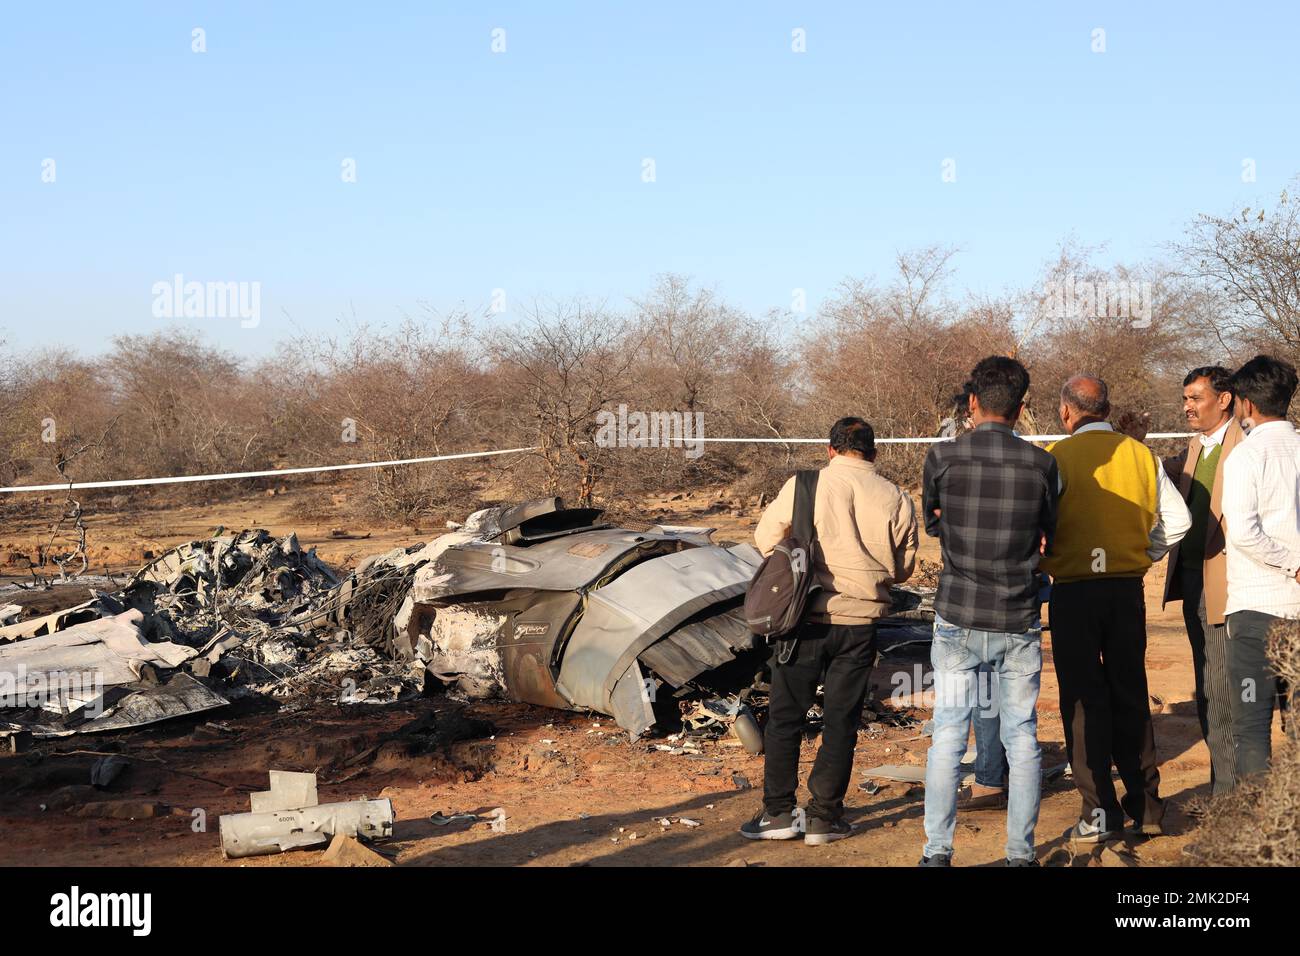 Jabalpur, India. 28th Jan, 2023. Gwalior, Madhya Pradesh, India, January, 28,2023. People stand near the wreckage of an aircraft after a Sukhoi Su-30 and Dassault Mirage 2000 fighter jet crashed during an exercise in Pahargarh area, about 50 kilometers (30 miles) from Gwalior, Madhya Pradesh on January 28, 2023. Police present at the accident site said that there was an apparent mid-air collision during the exercise on 28 January. Photo By - Uma Shankar Mishra Credit: River Ganga/Alamy Live News Stock Photo